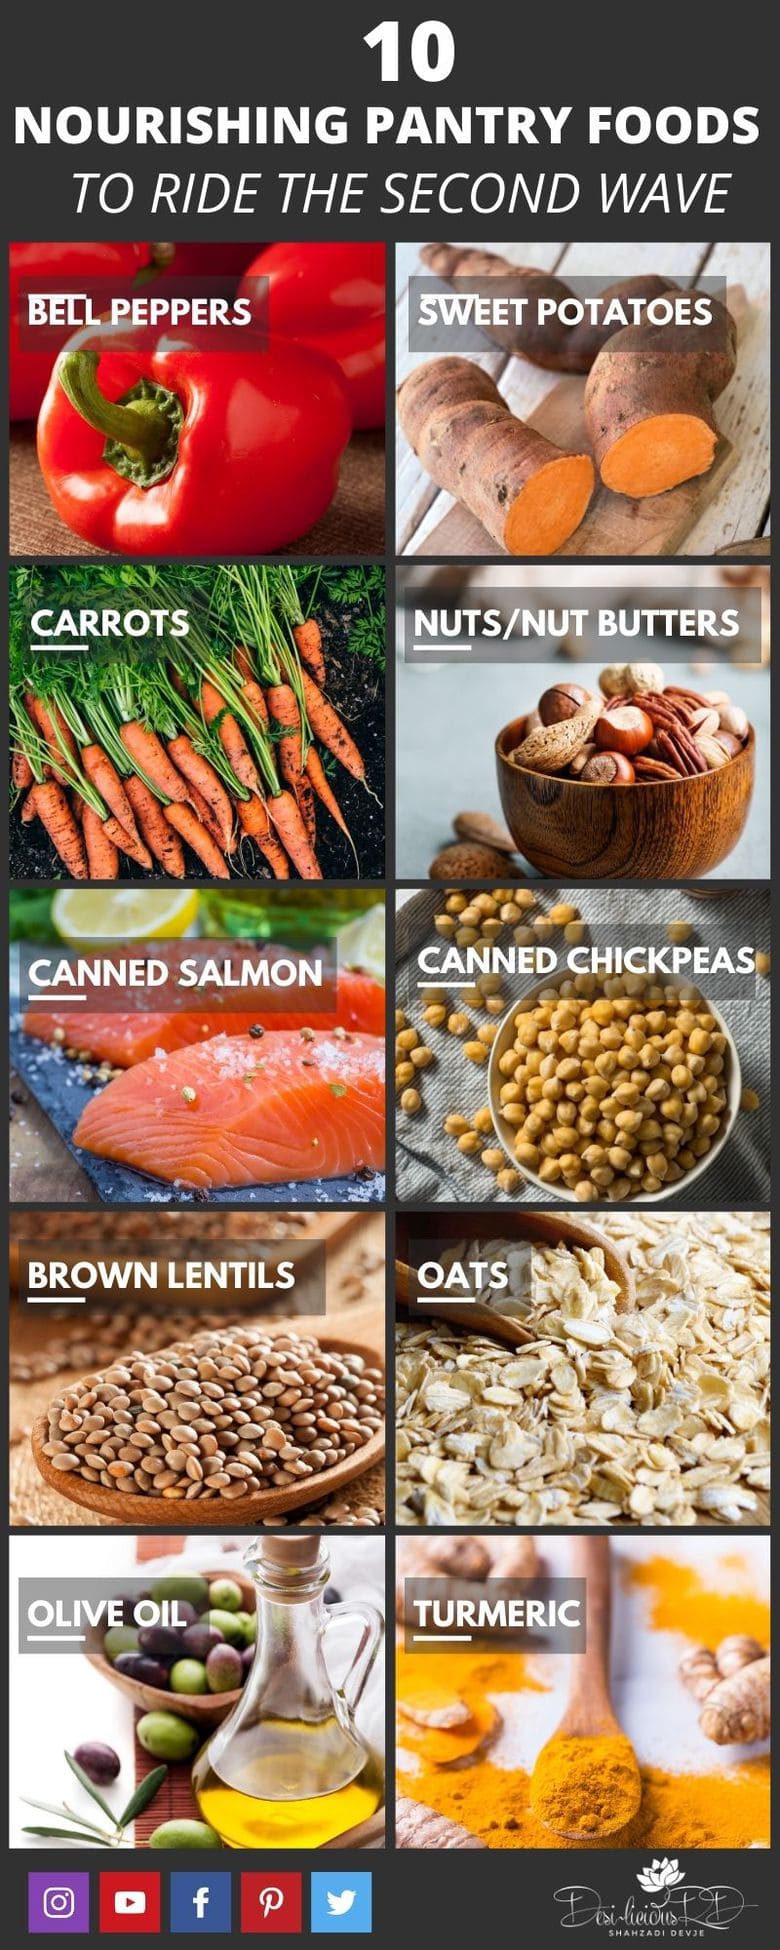 infographic of 10 pantry foods to create healthy meals. Includes peppers, potatoes, nuts, vegetables, oats and lentils